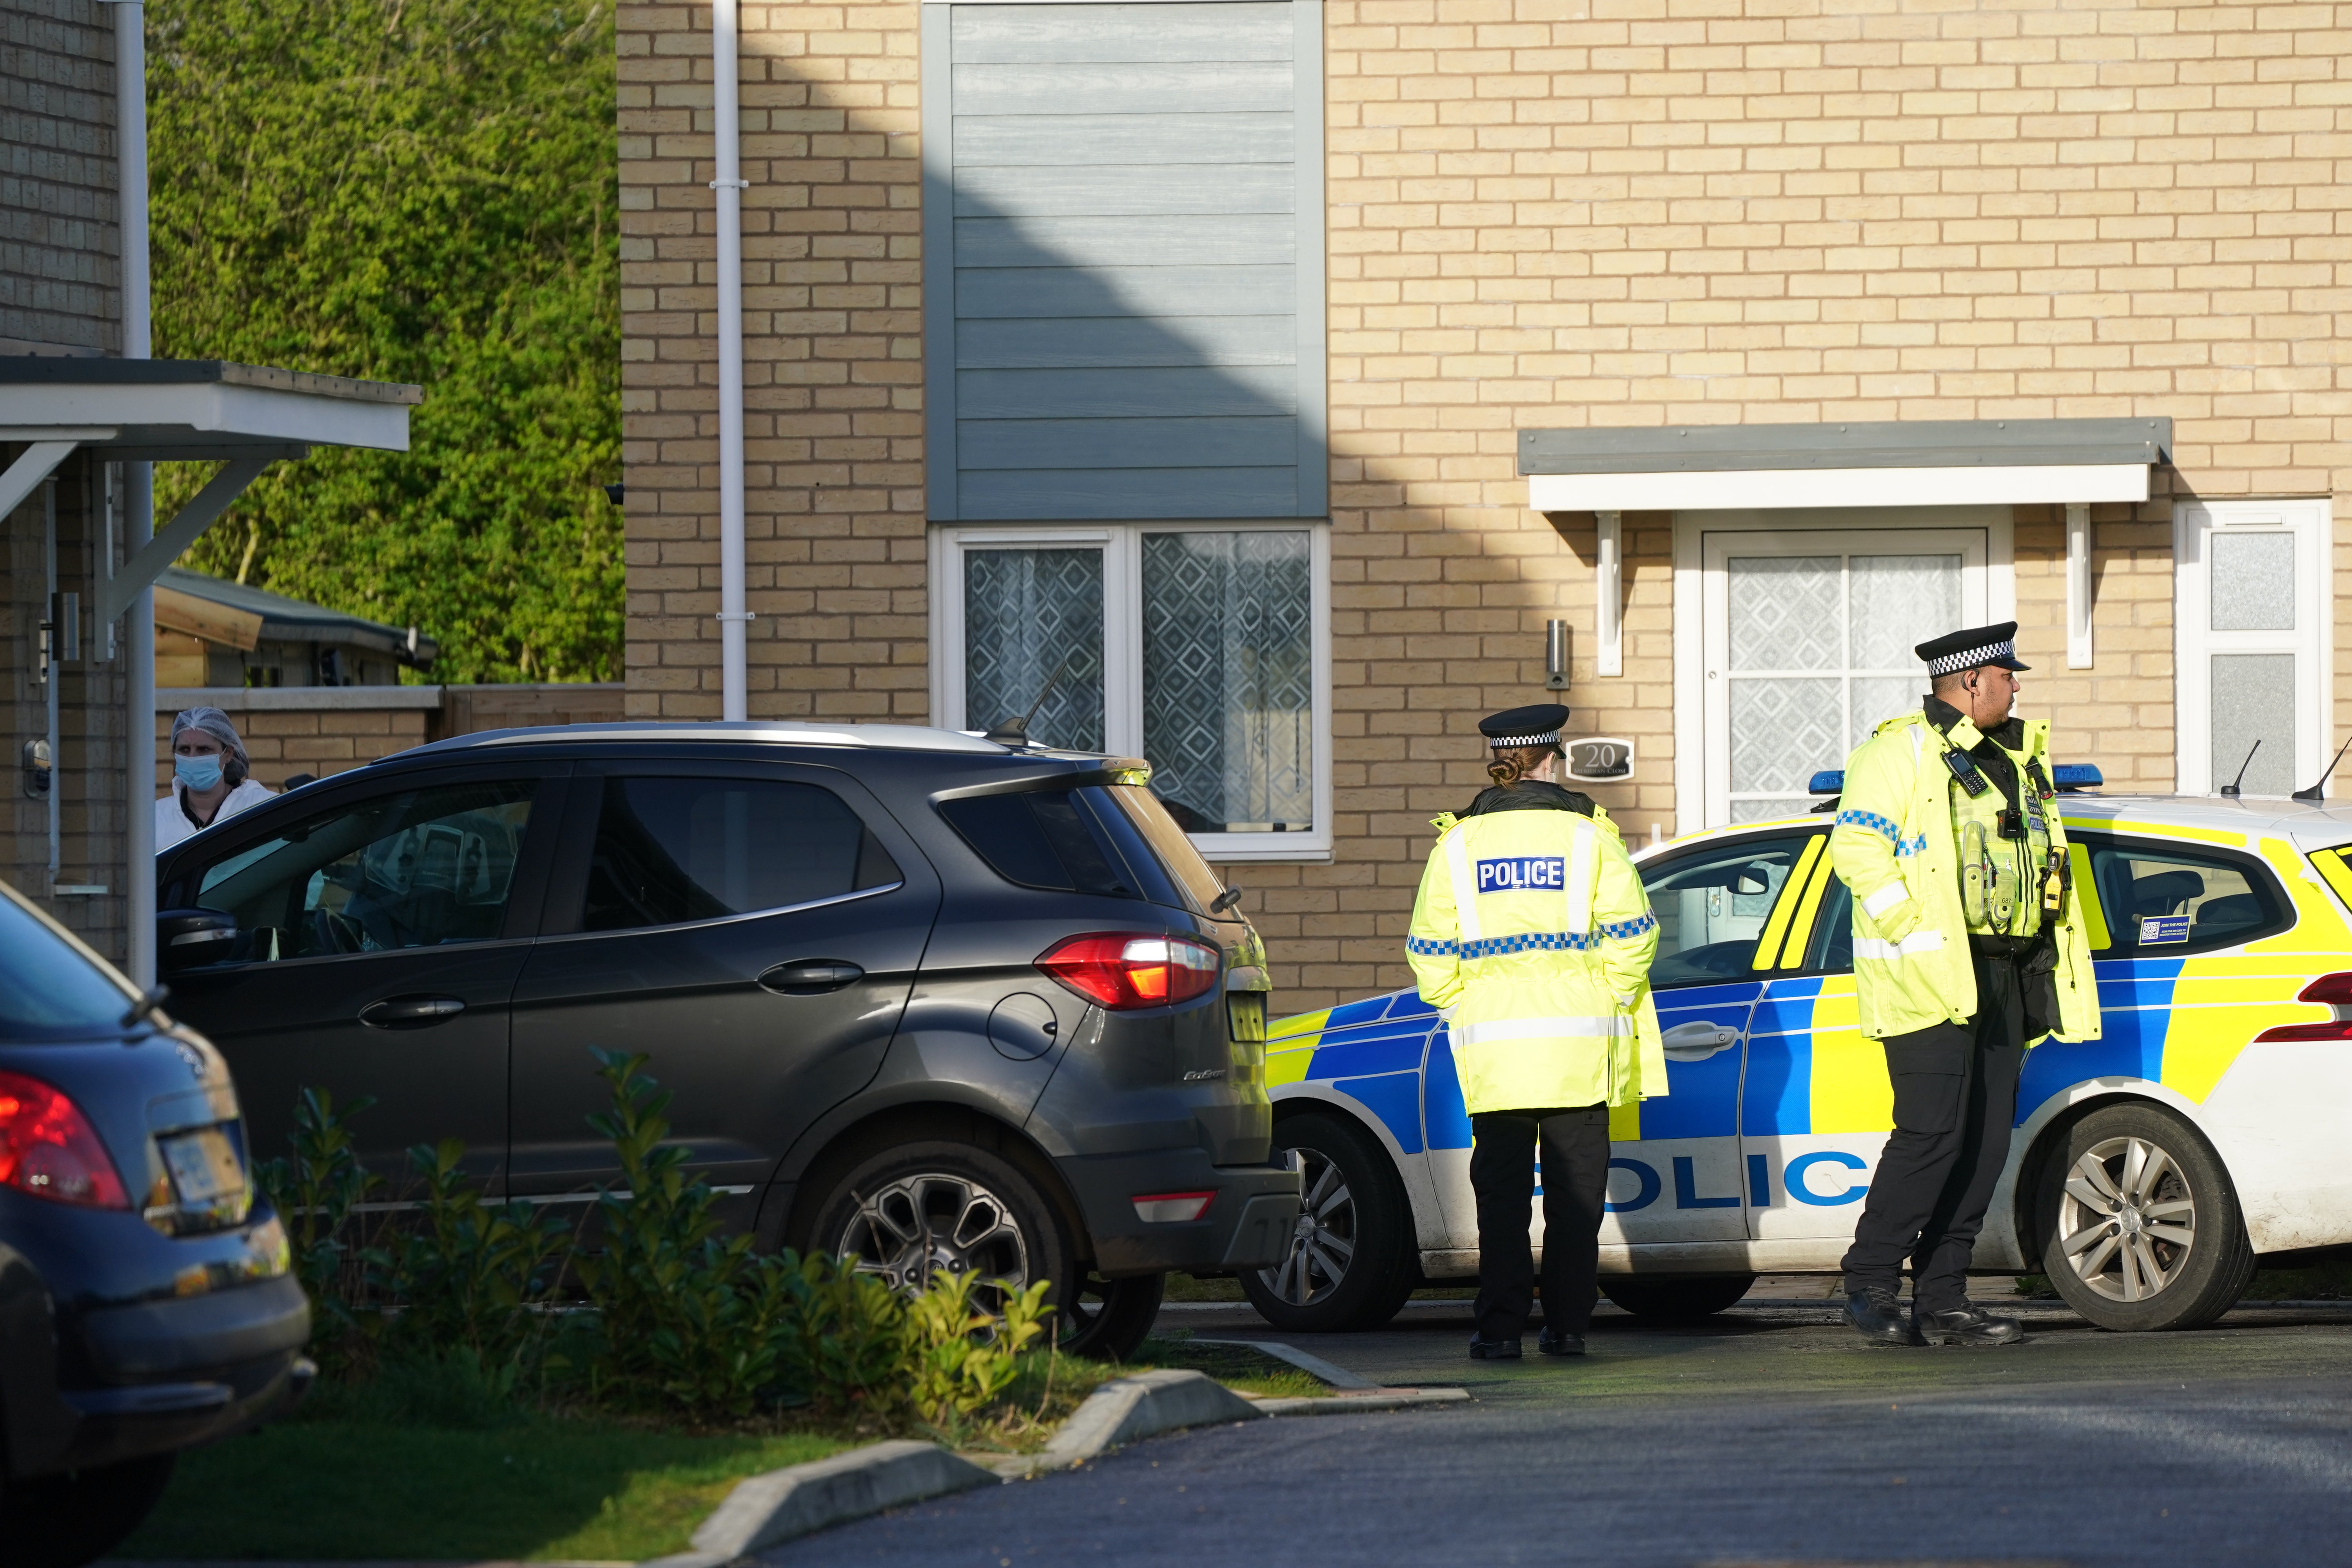 Police at the scene in Meridian Close, Bluntisham, Cambridgeshire, which has been cordoned off